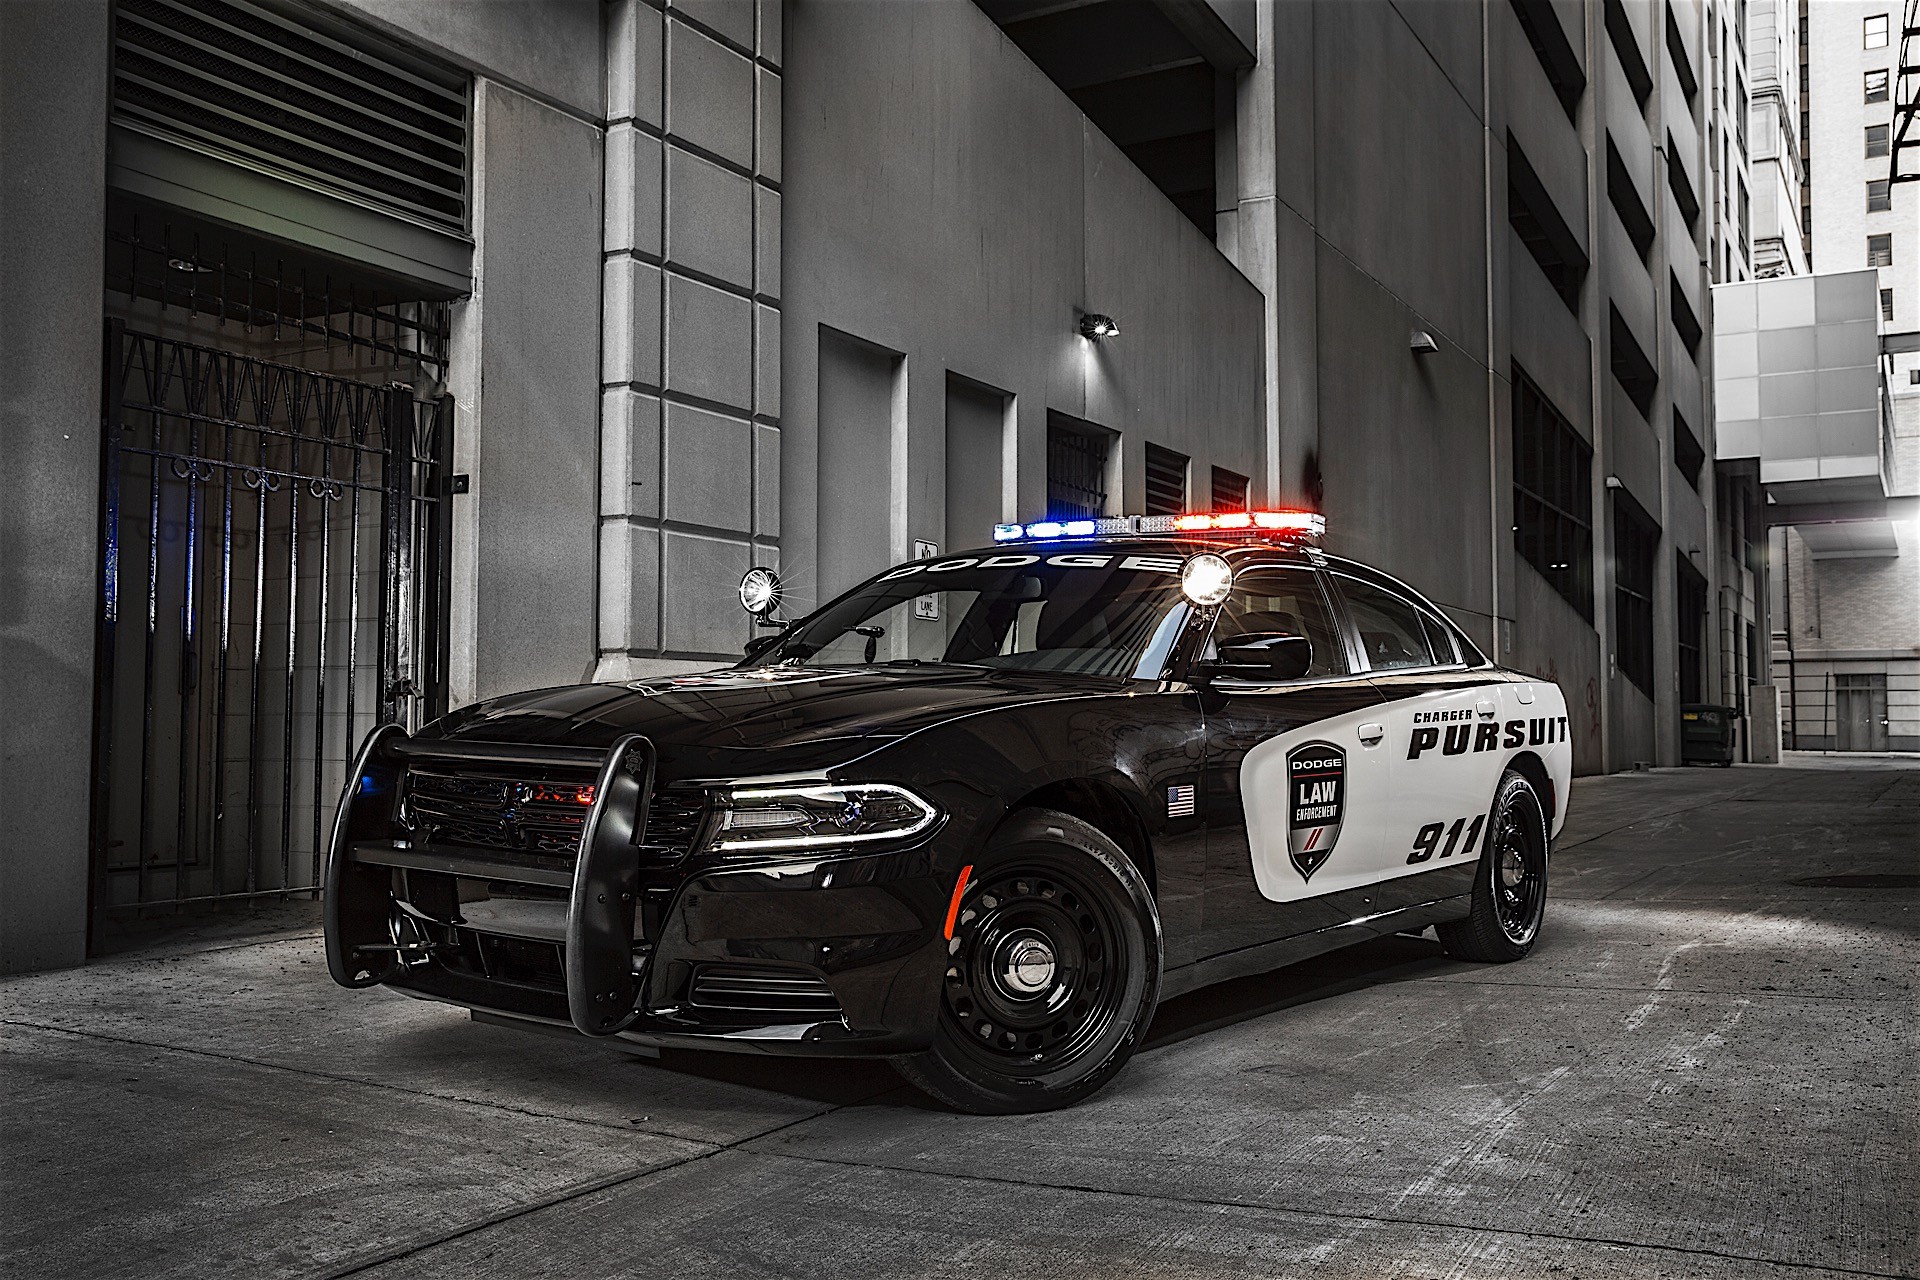 Dodge Updates 2017 Charger Pursuit With Complimentary Officer